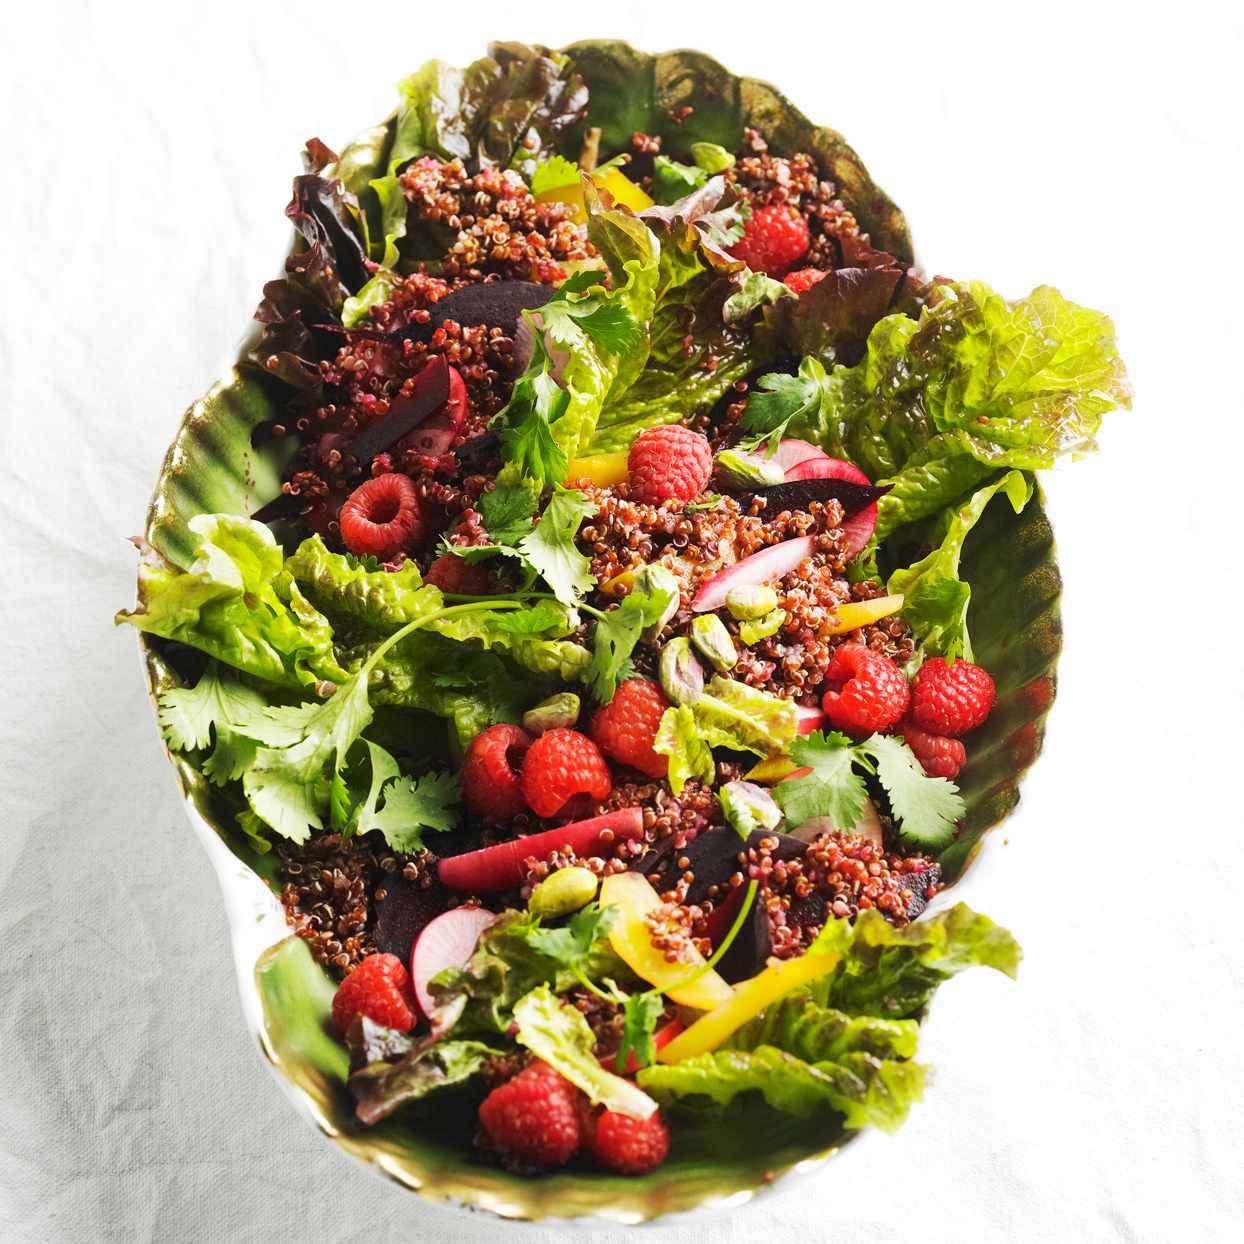 Red Quinoa Salad with Raspberries and Beets